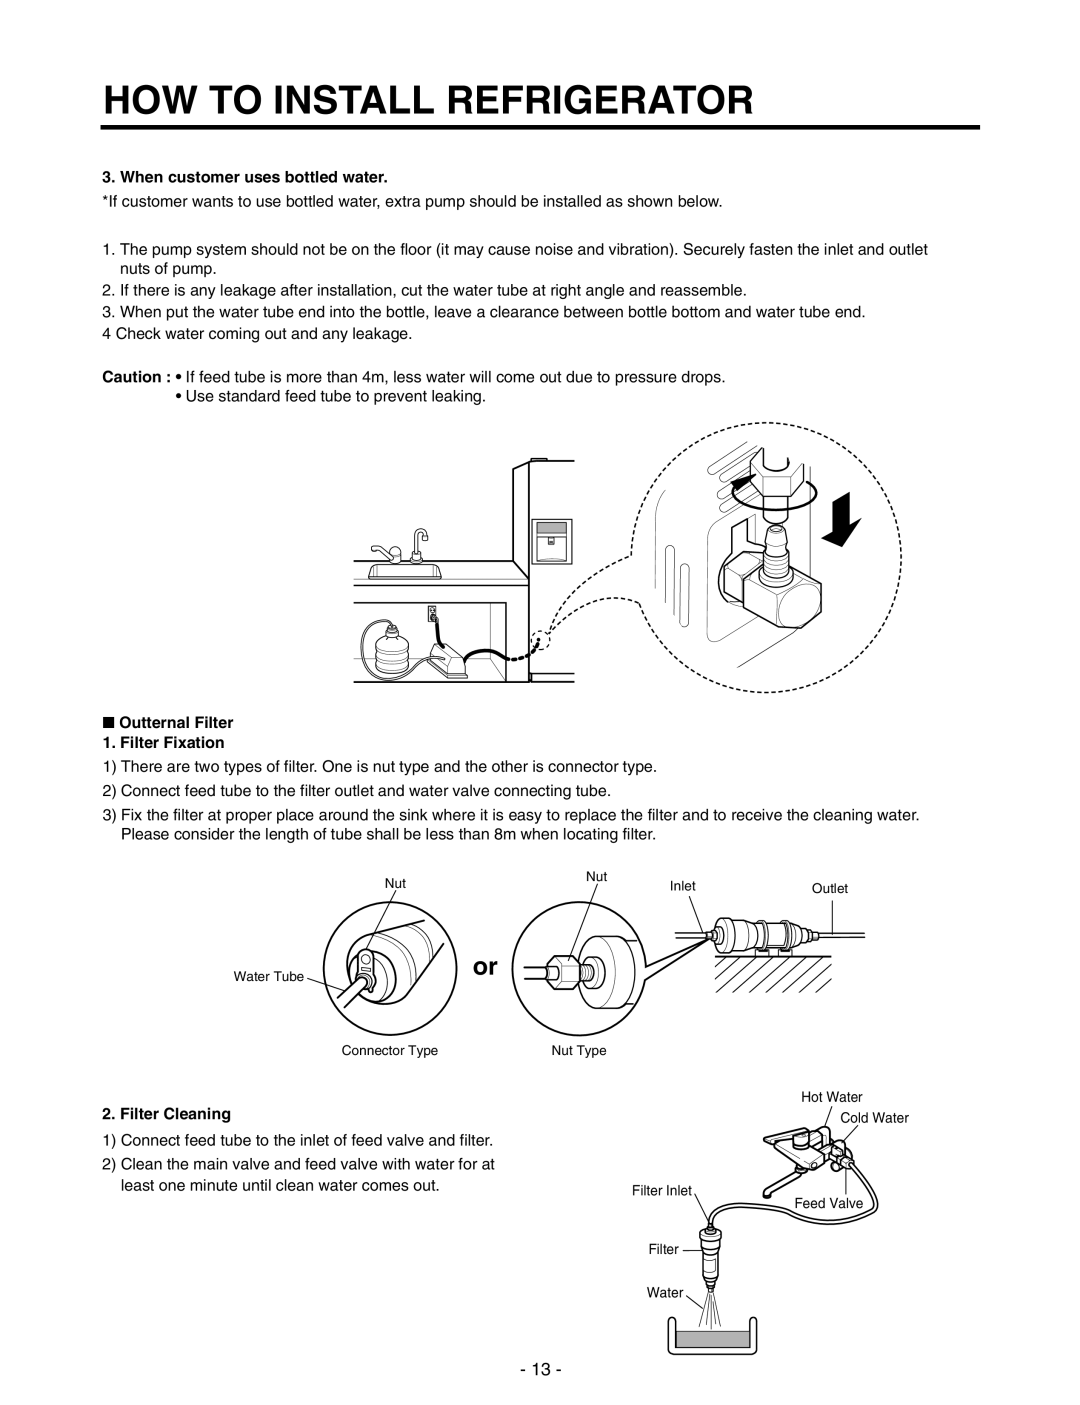 LG Electronics GR-P257/L257, GR-P227/L227 How To Install Refrigerator, When customer uses bottled water, Filter Cleaning 